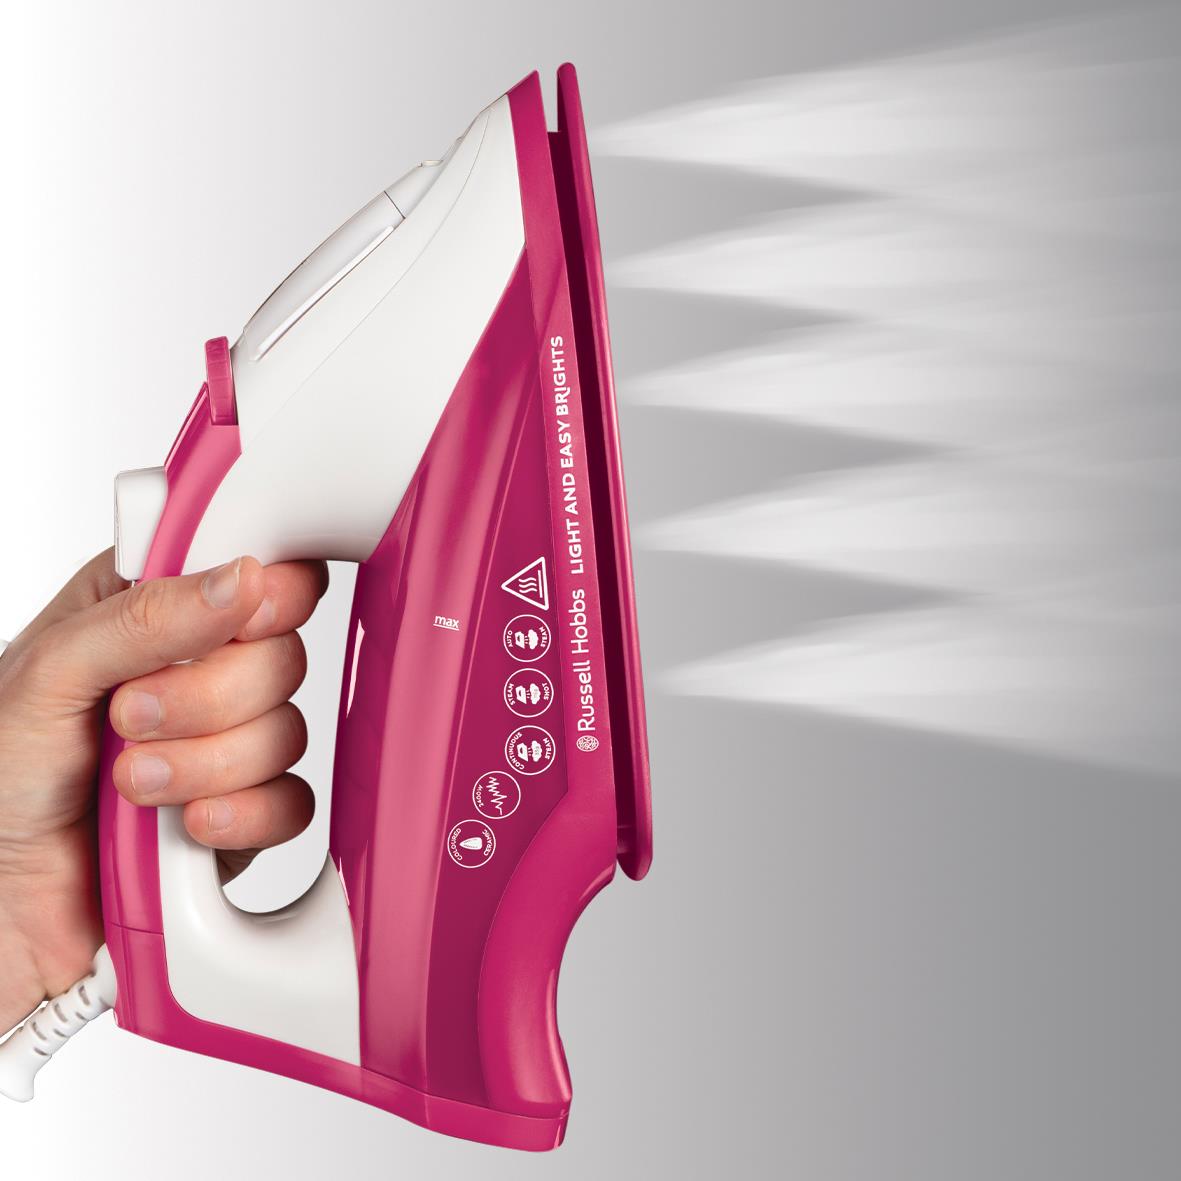 Russell Hobbs Light and Easy Berry Steam Iron